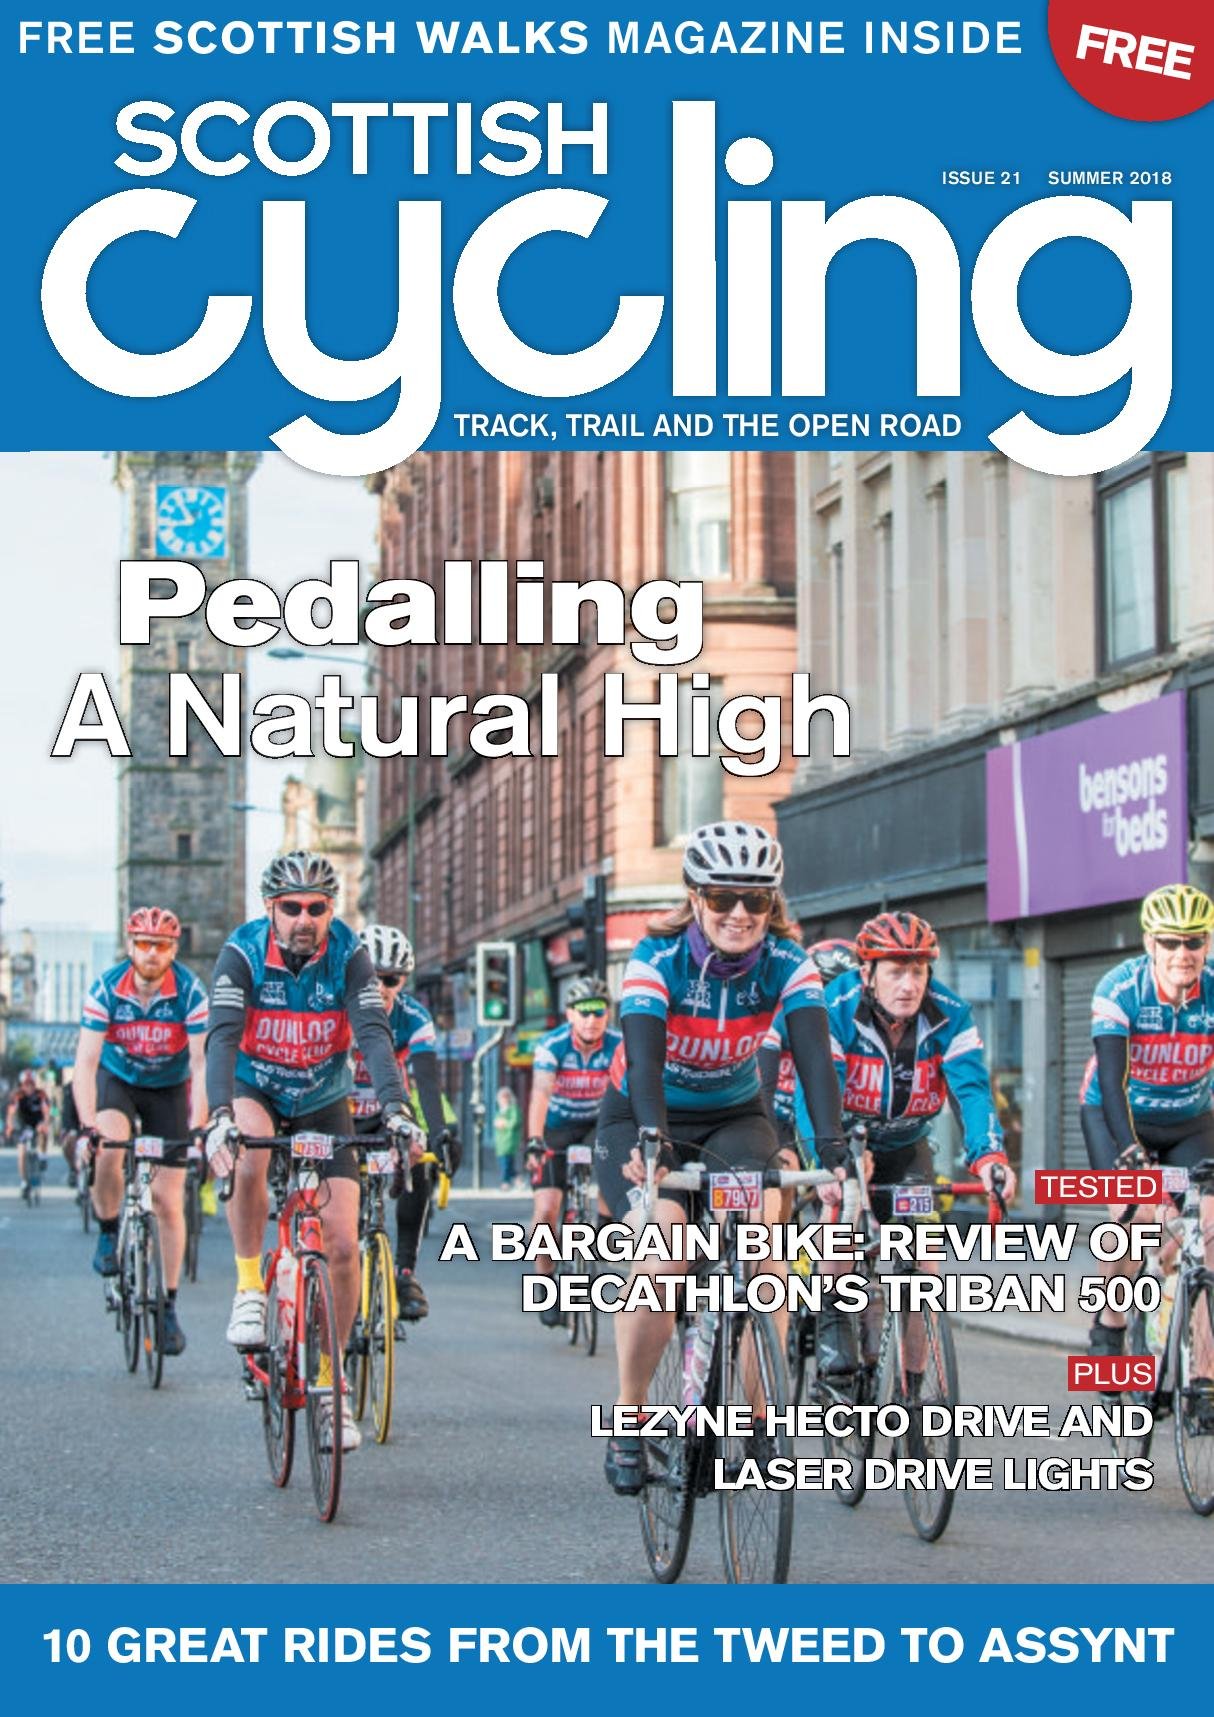 Scotland’s largest free cycling magazine, edited by Cameron McNeish & published by Herald & Times. Enjoy a relaxed read about road & mountain biking.